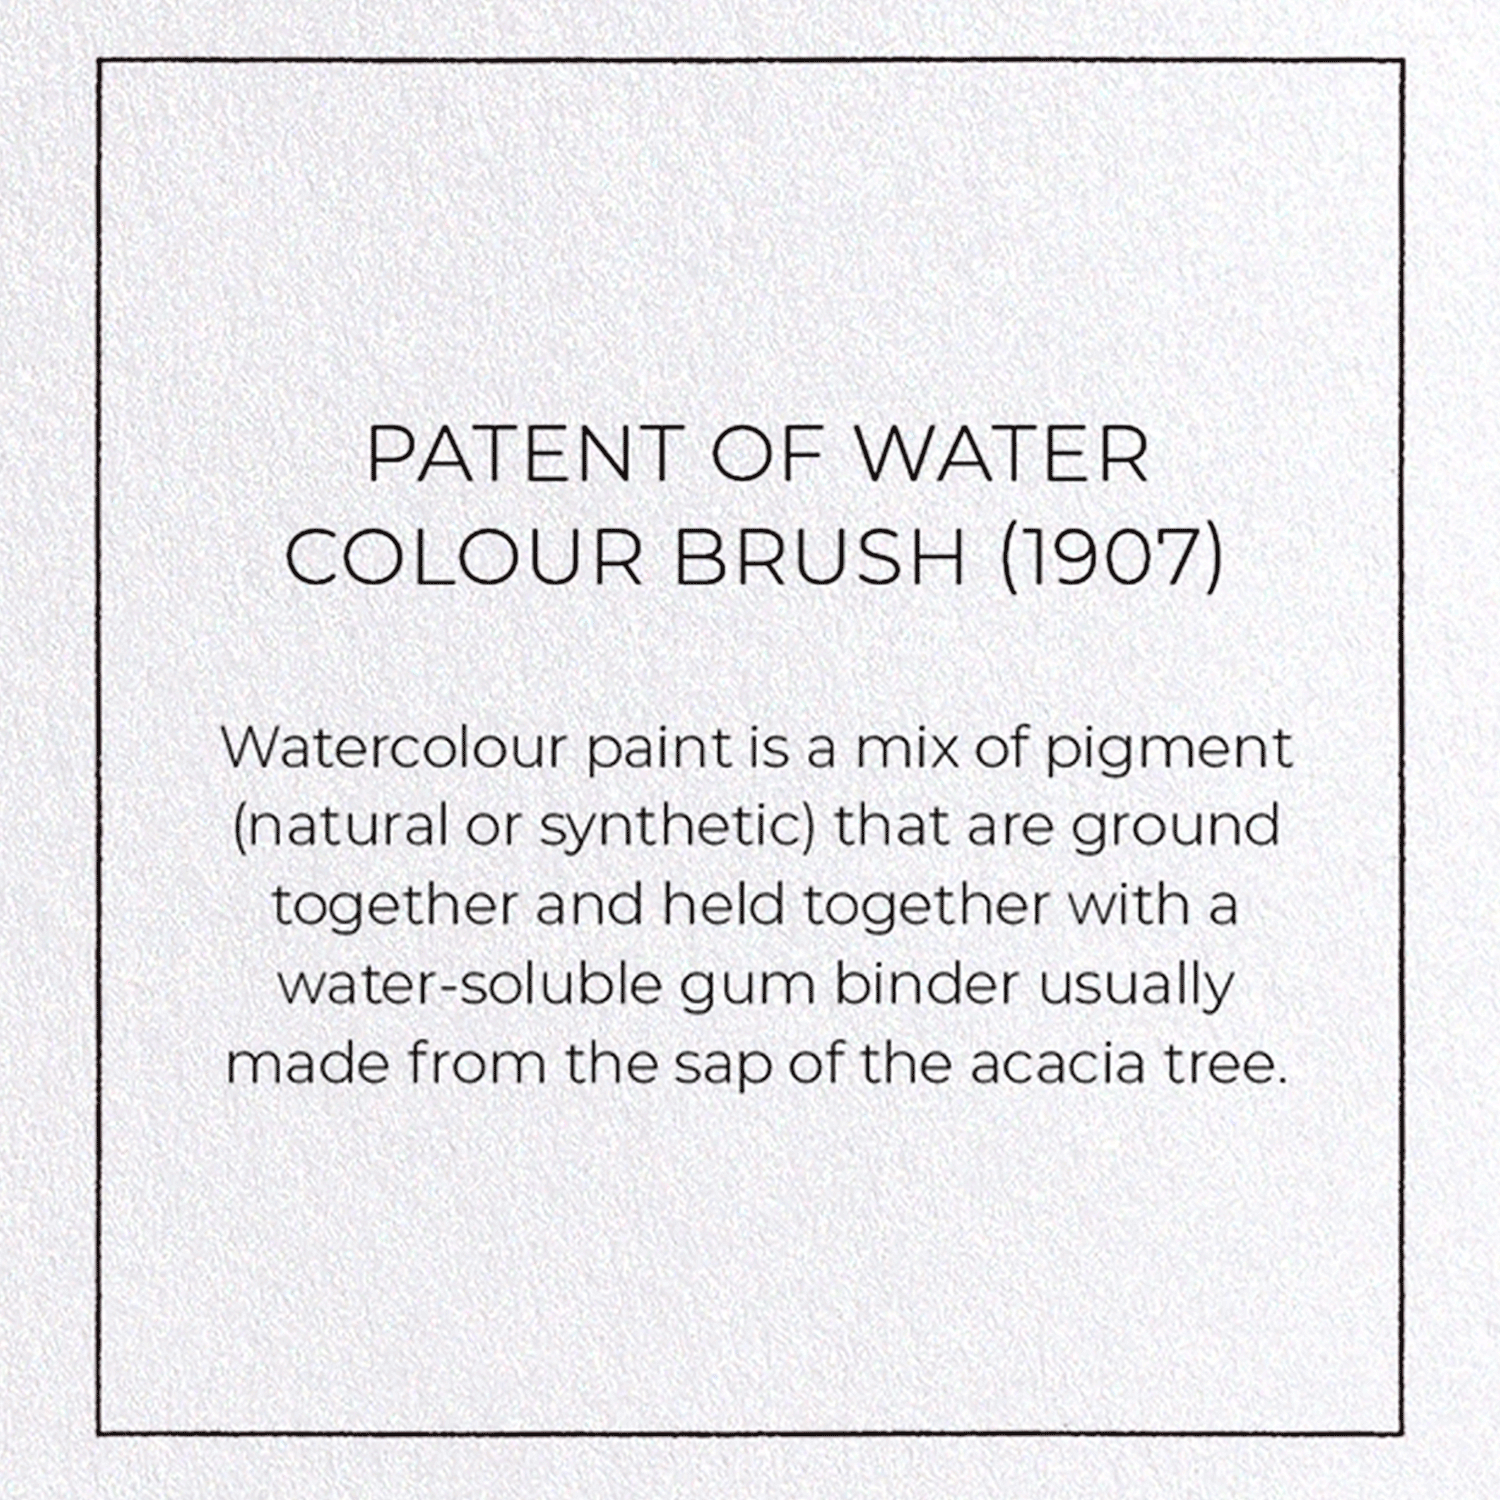 PATENT OF WATER COLOUR BRUSH (1907)